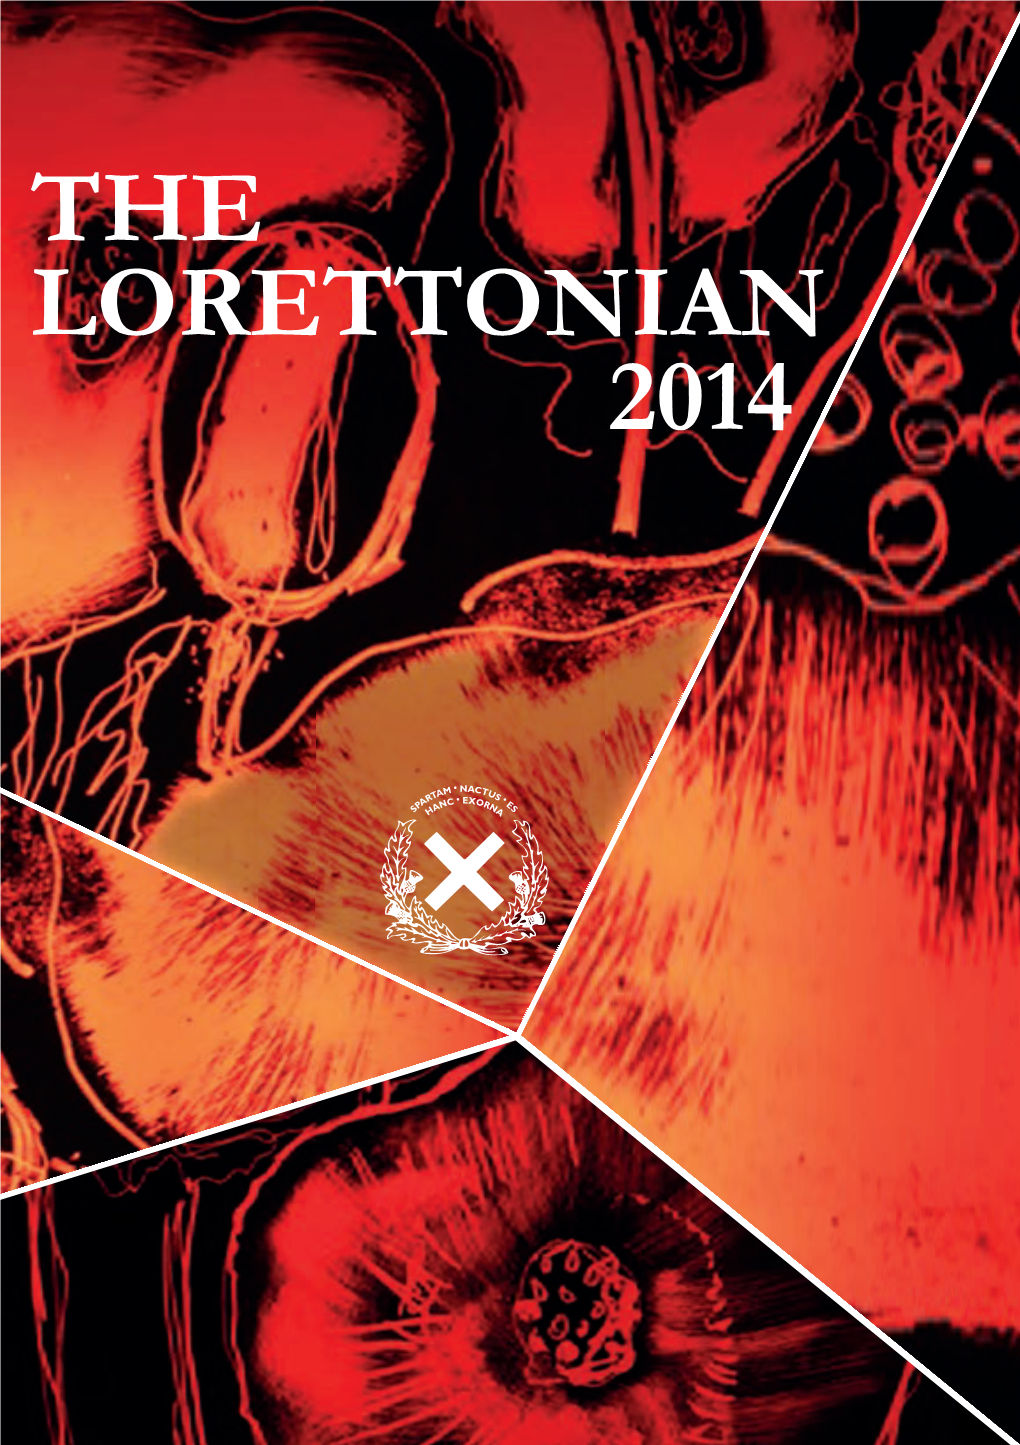 THE LORETTONIAN 2014 Information About the Design of the Stained Glass Window Commemorating the 1914 Christmas Truce